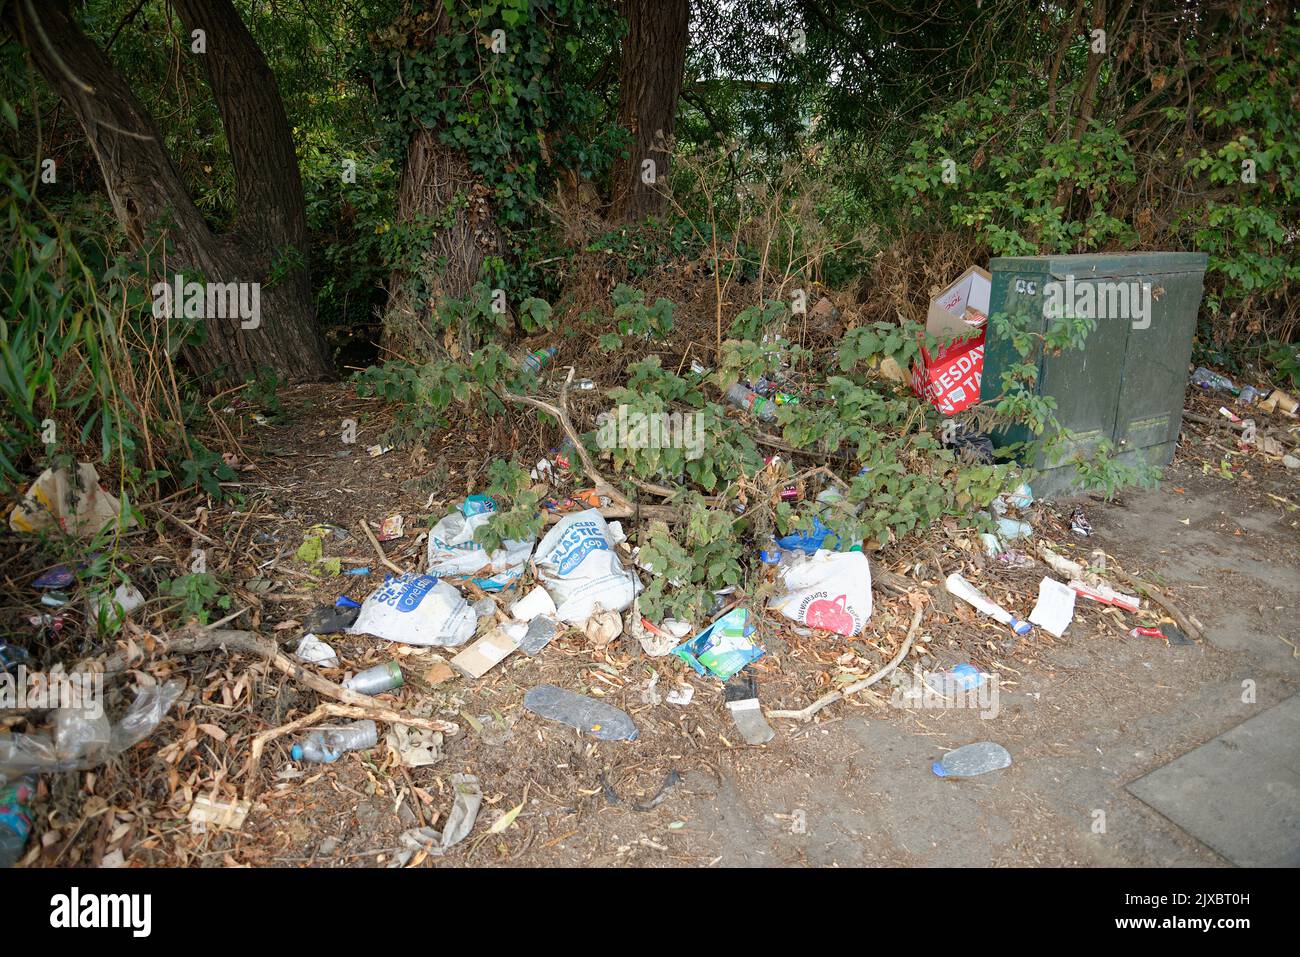 Rubbish or trash at the side of a road in London, England. An unattractive sight. An unhealthy environment. Stock Photo